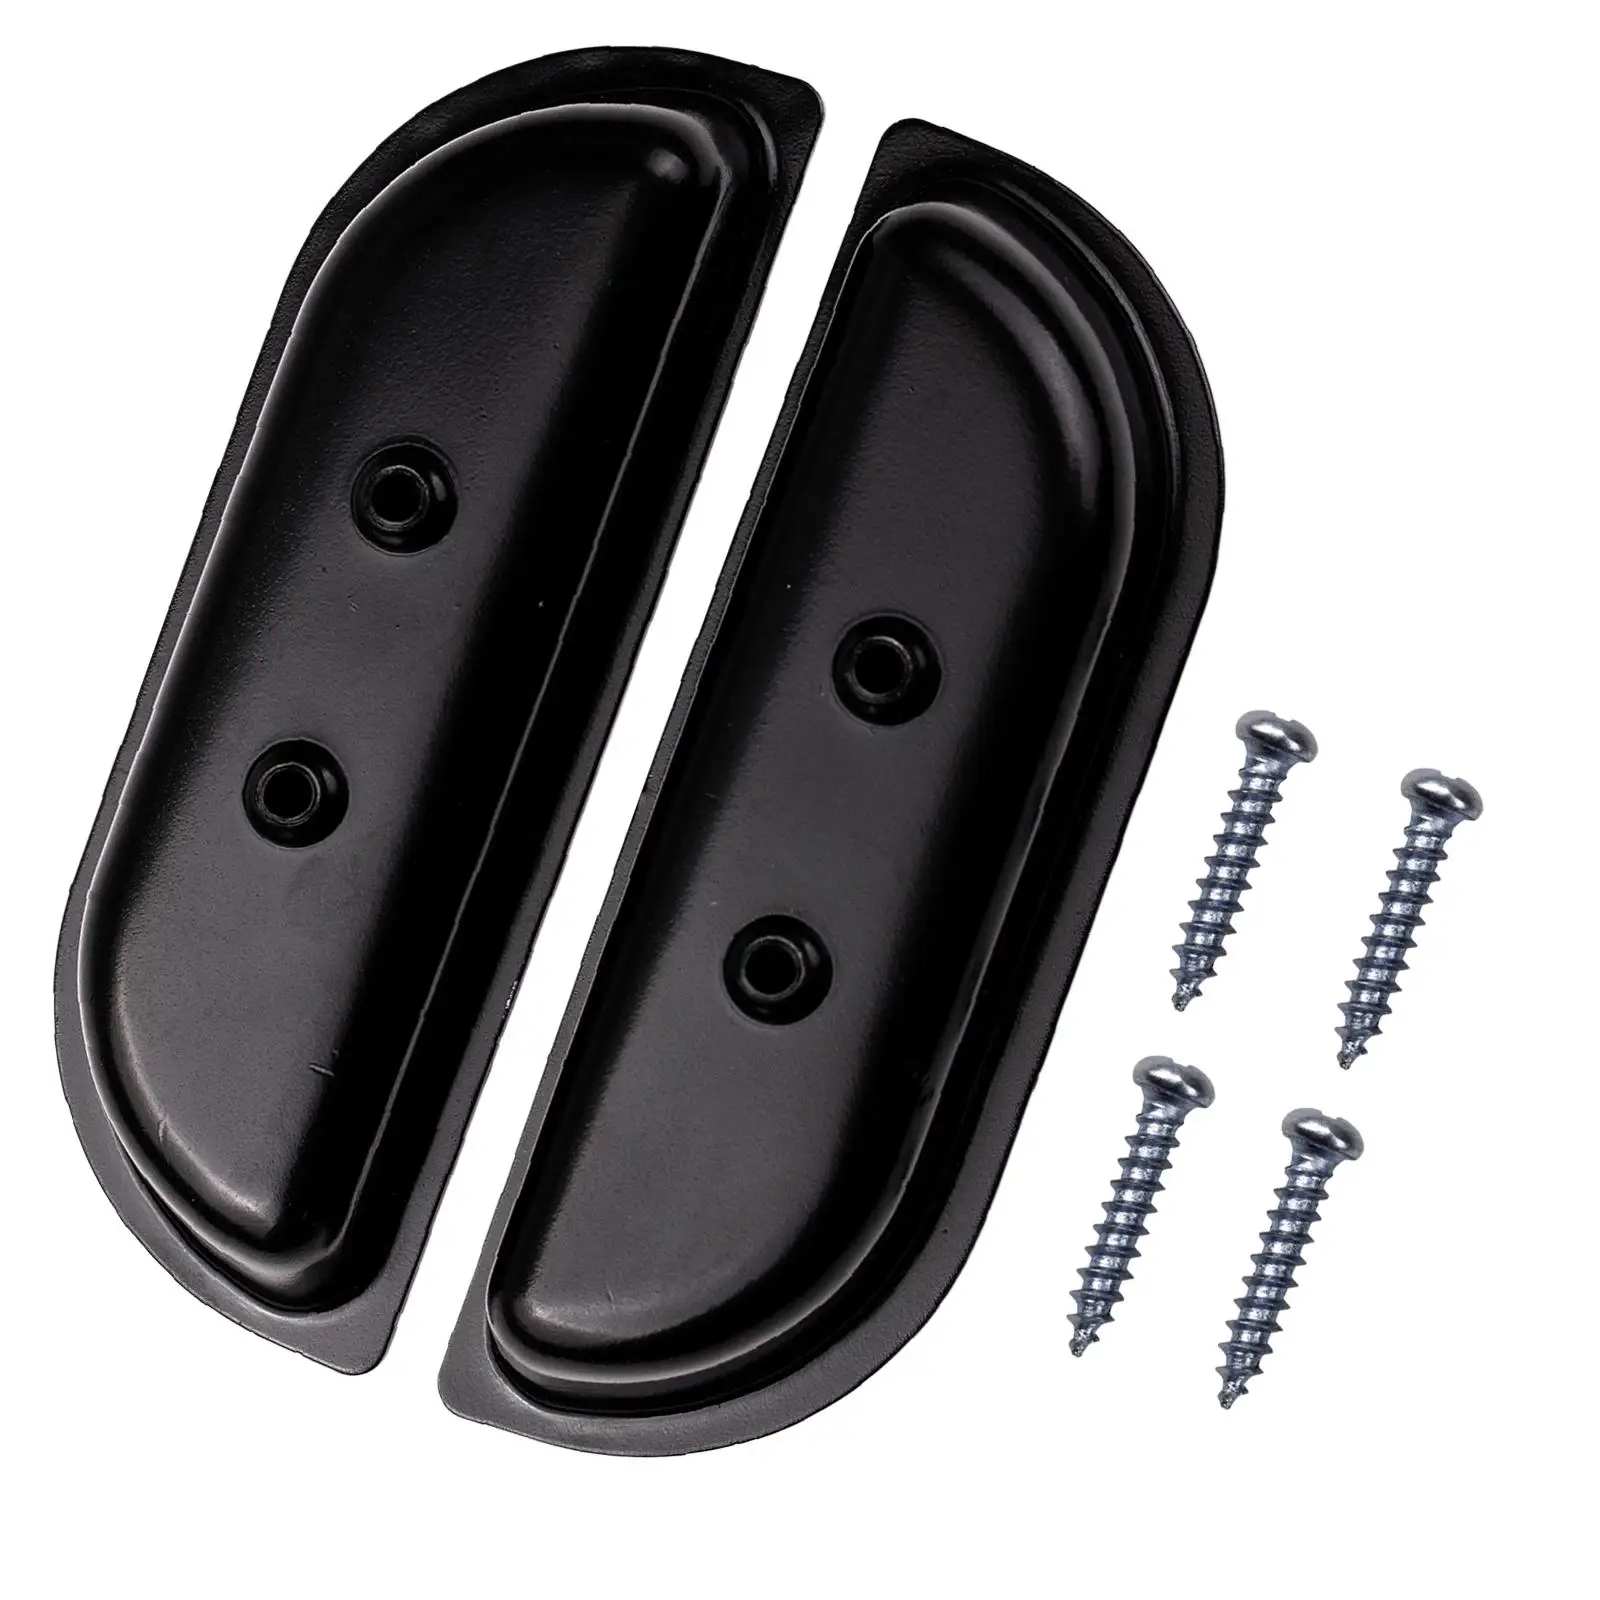 Front Door Panels Armrest Cover Spare Parts for Ford Truck F100 F350